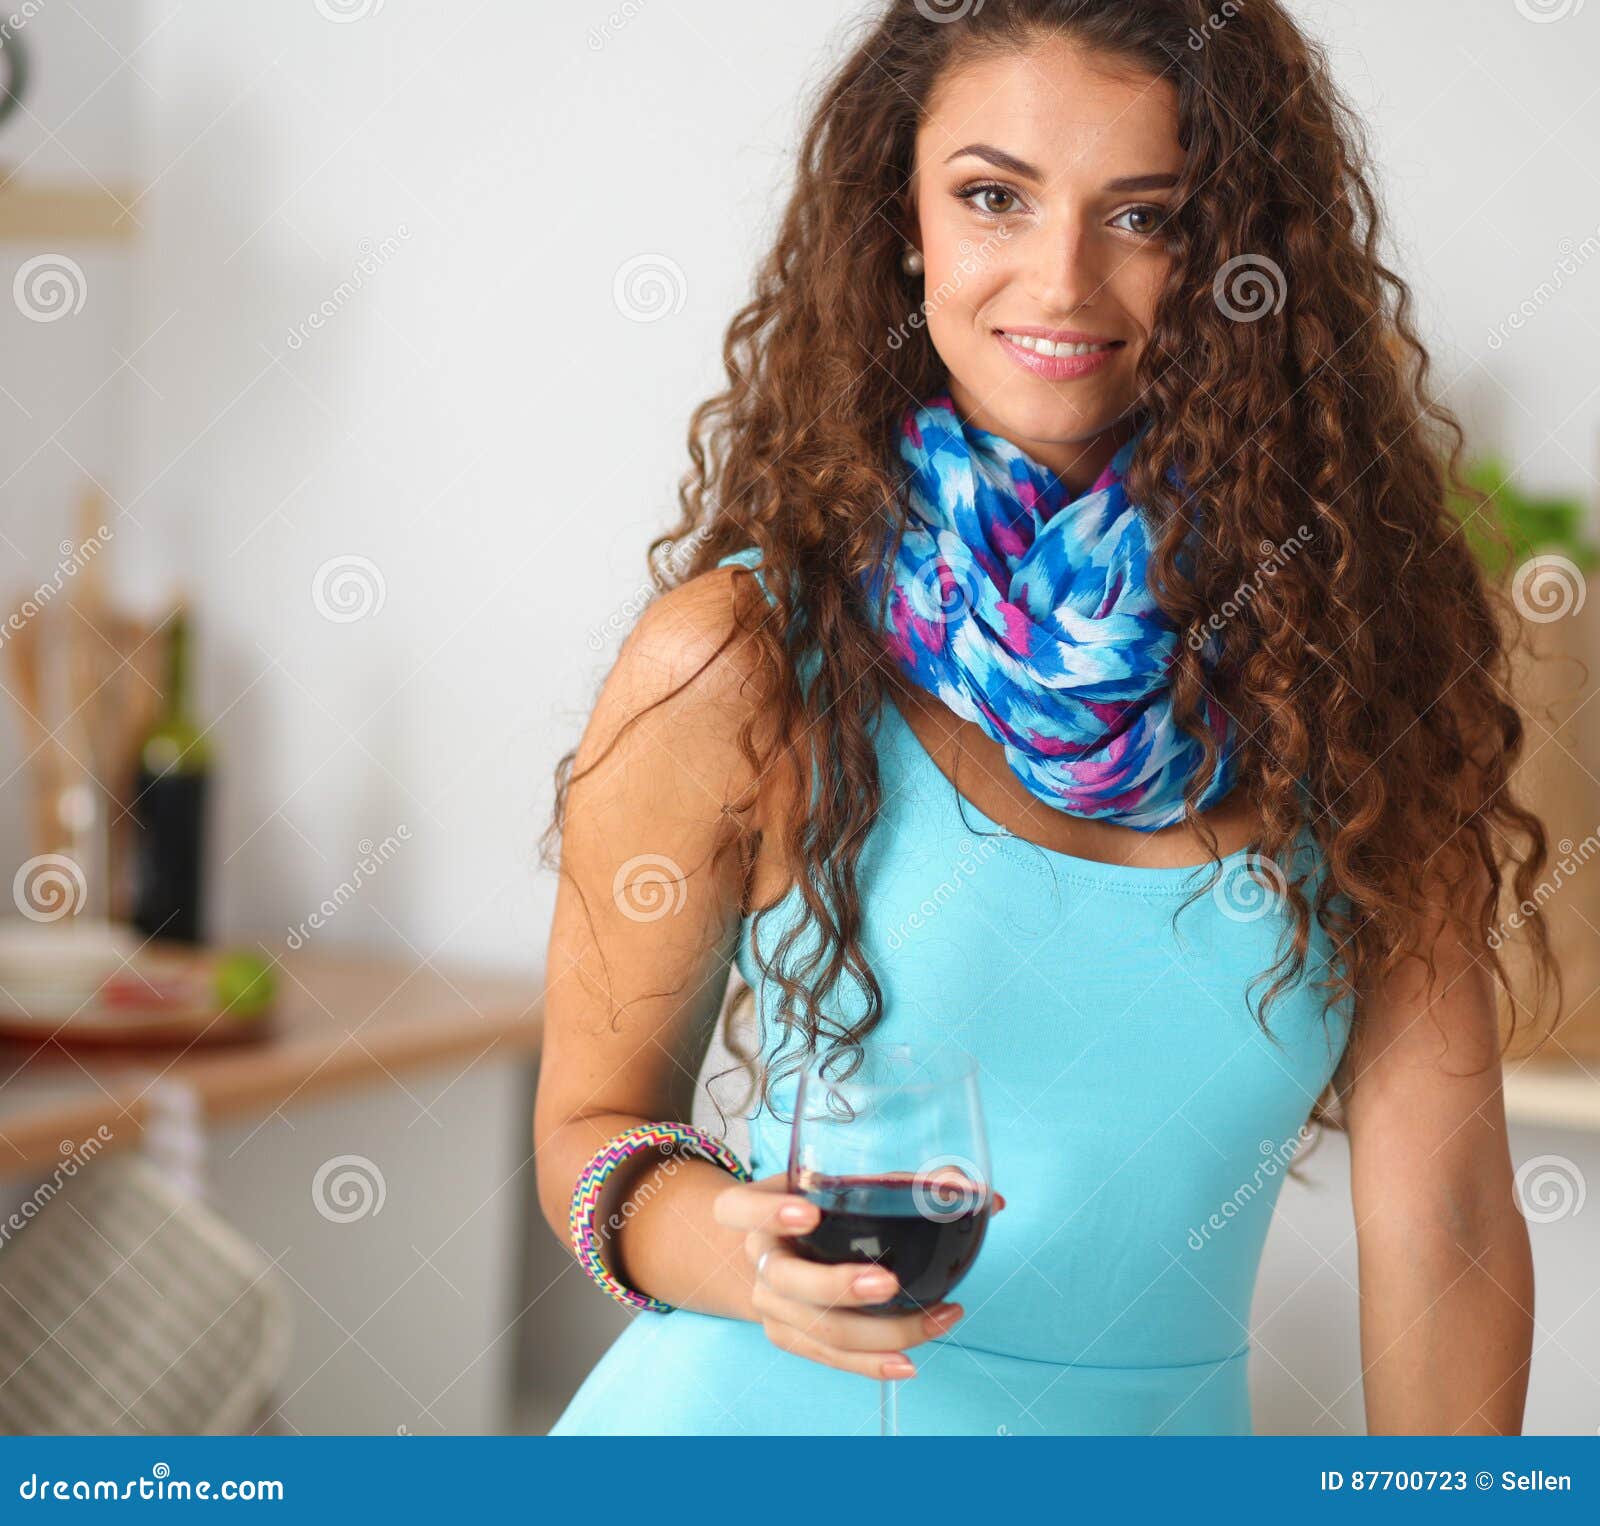 Kitchen Woman. Pretty Woman Drinking Some Wine at Home Stock Image ...